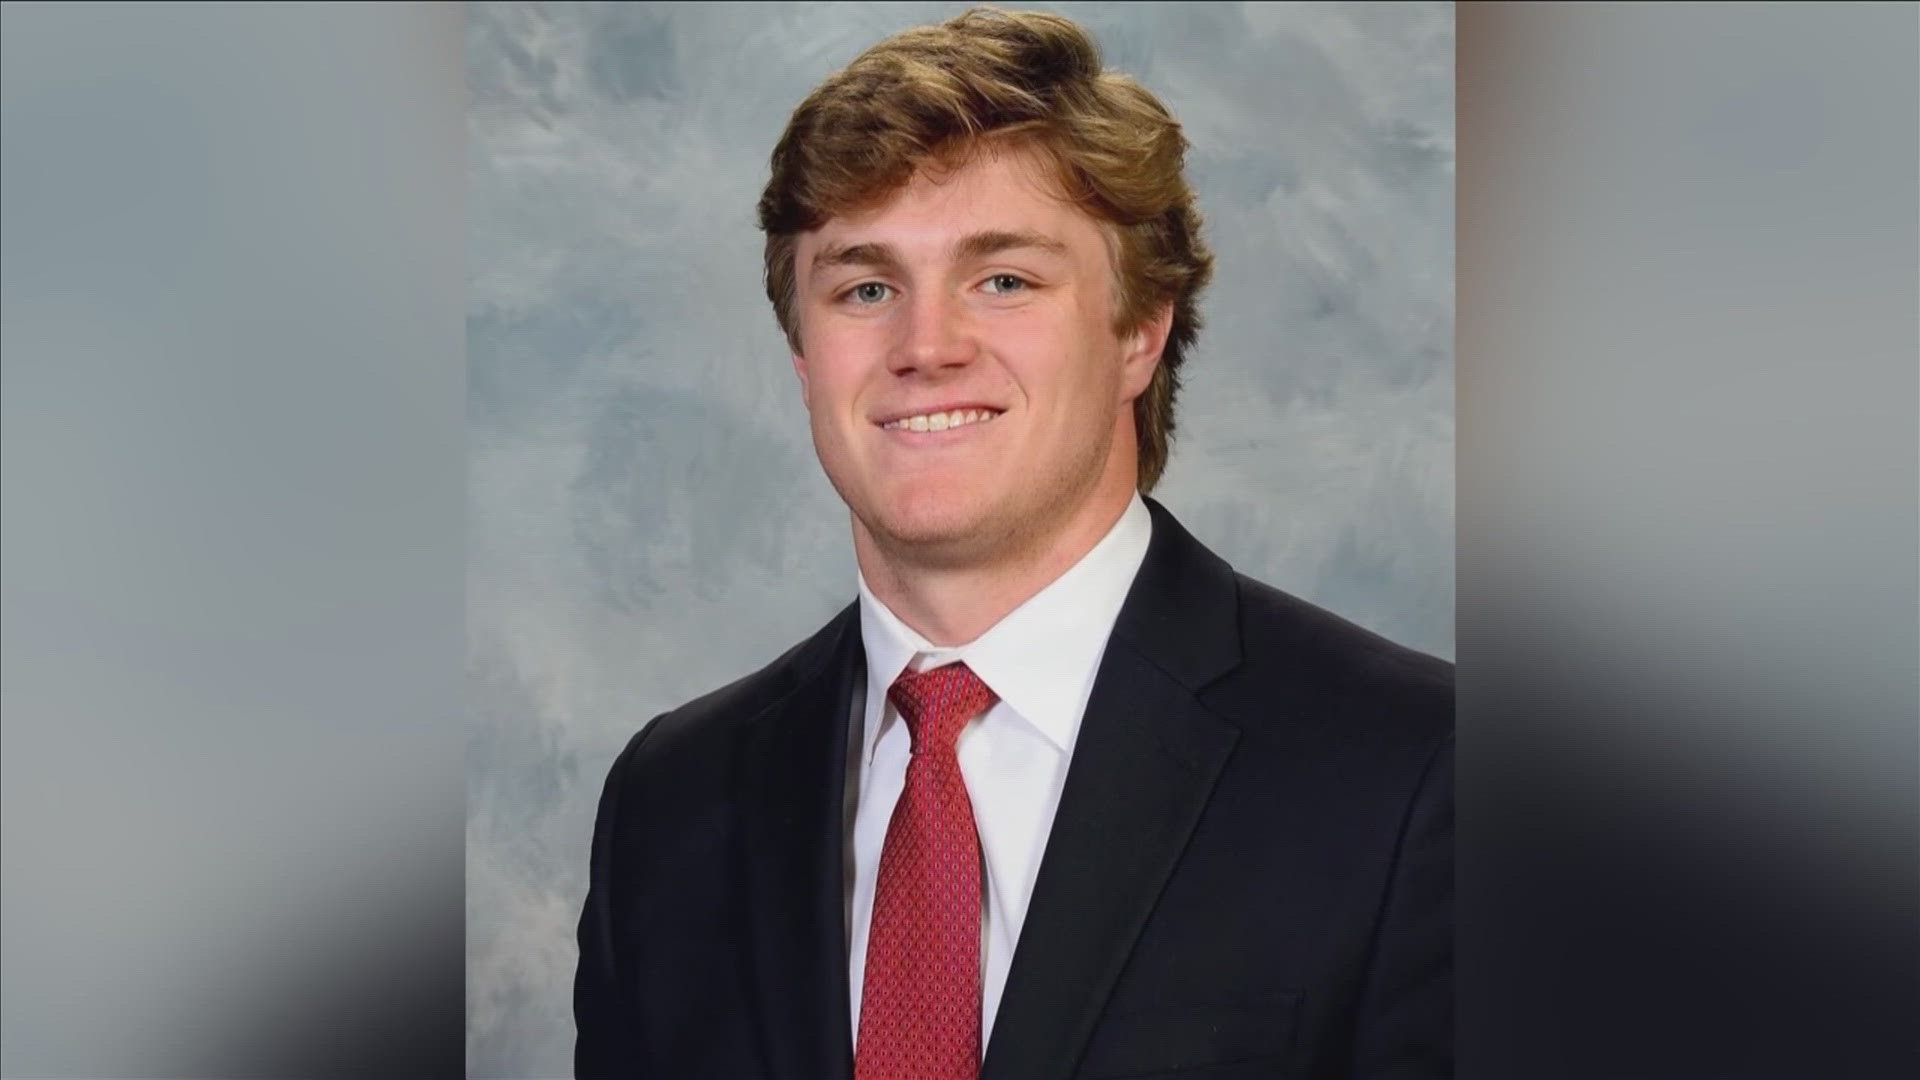 Wes Smith, a St. George’s alum, was shot and killed in Fort Worth, Texas near seventh street, just over two miles from Texas Christian University.